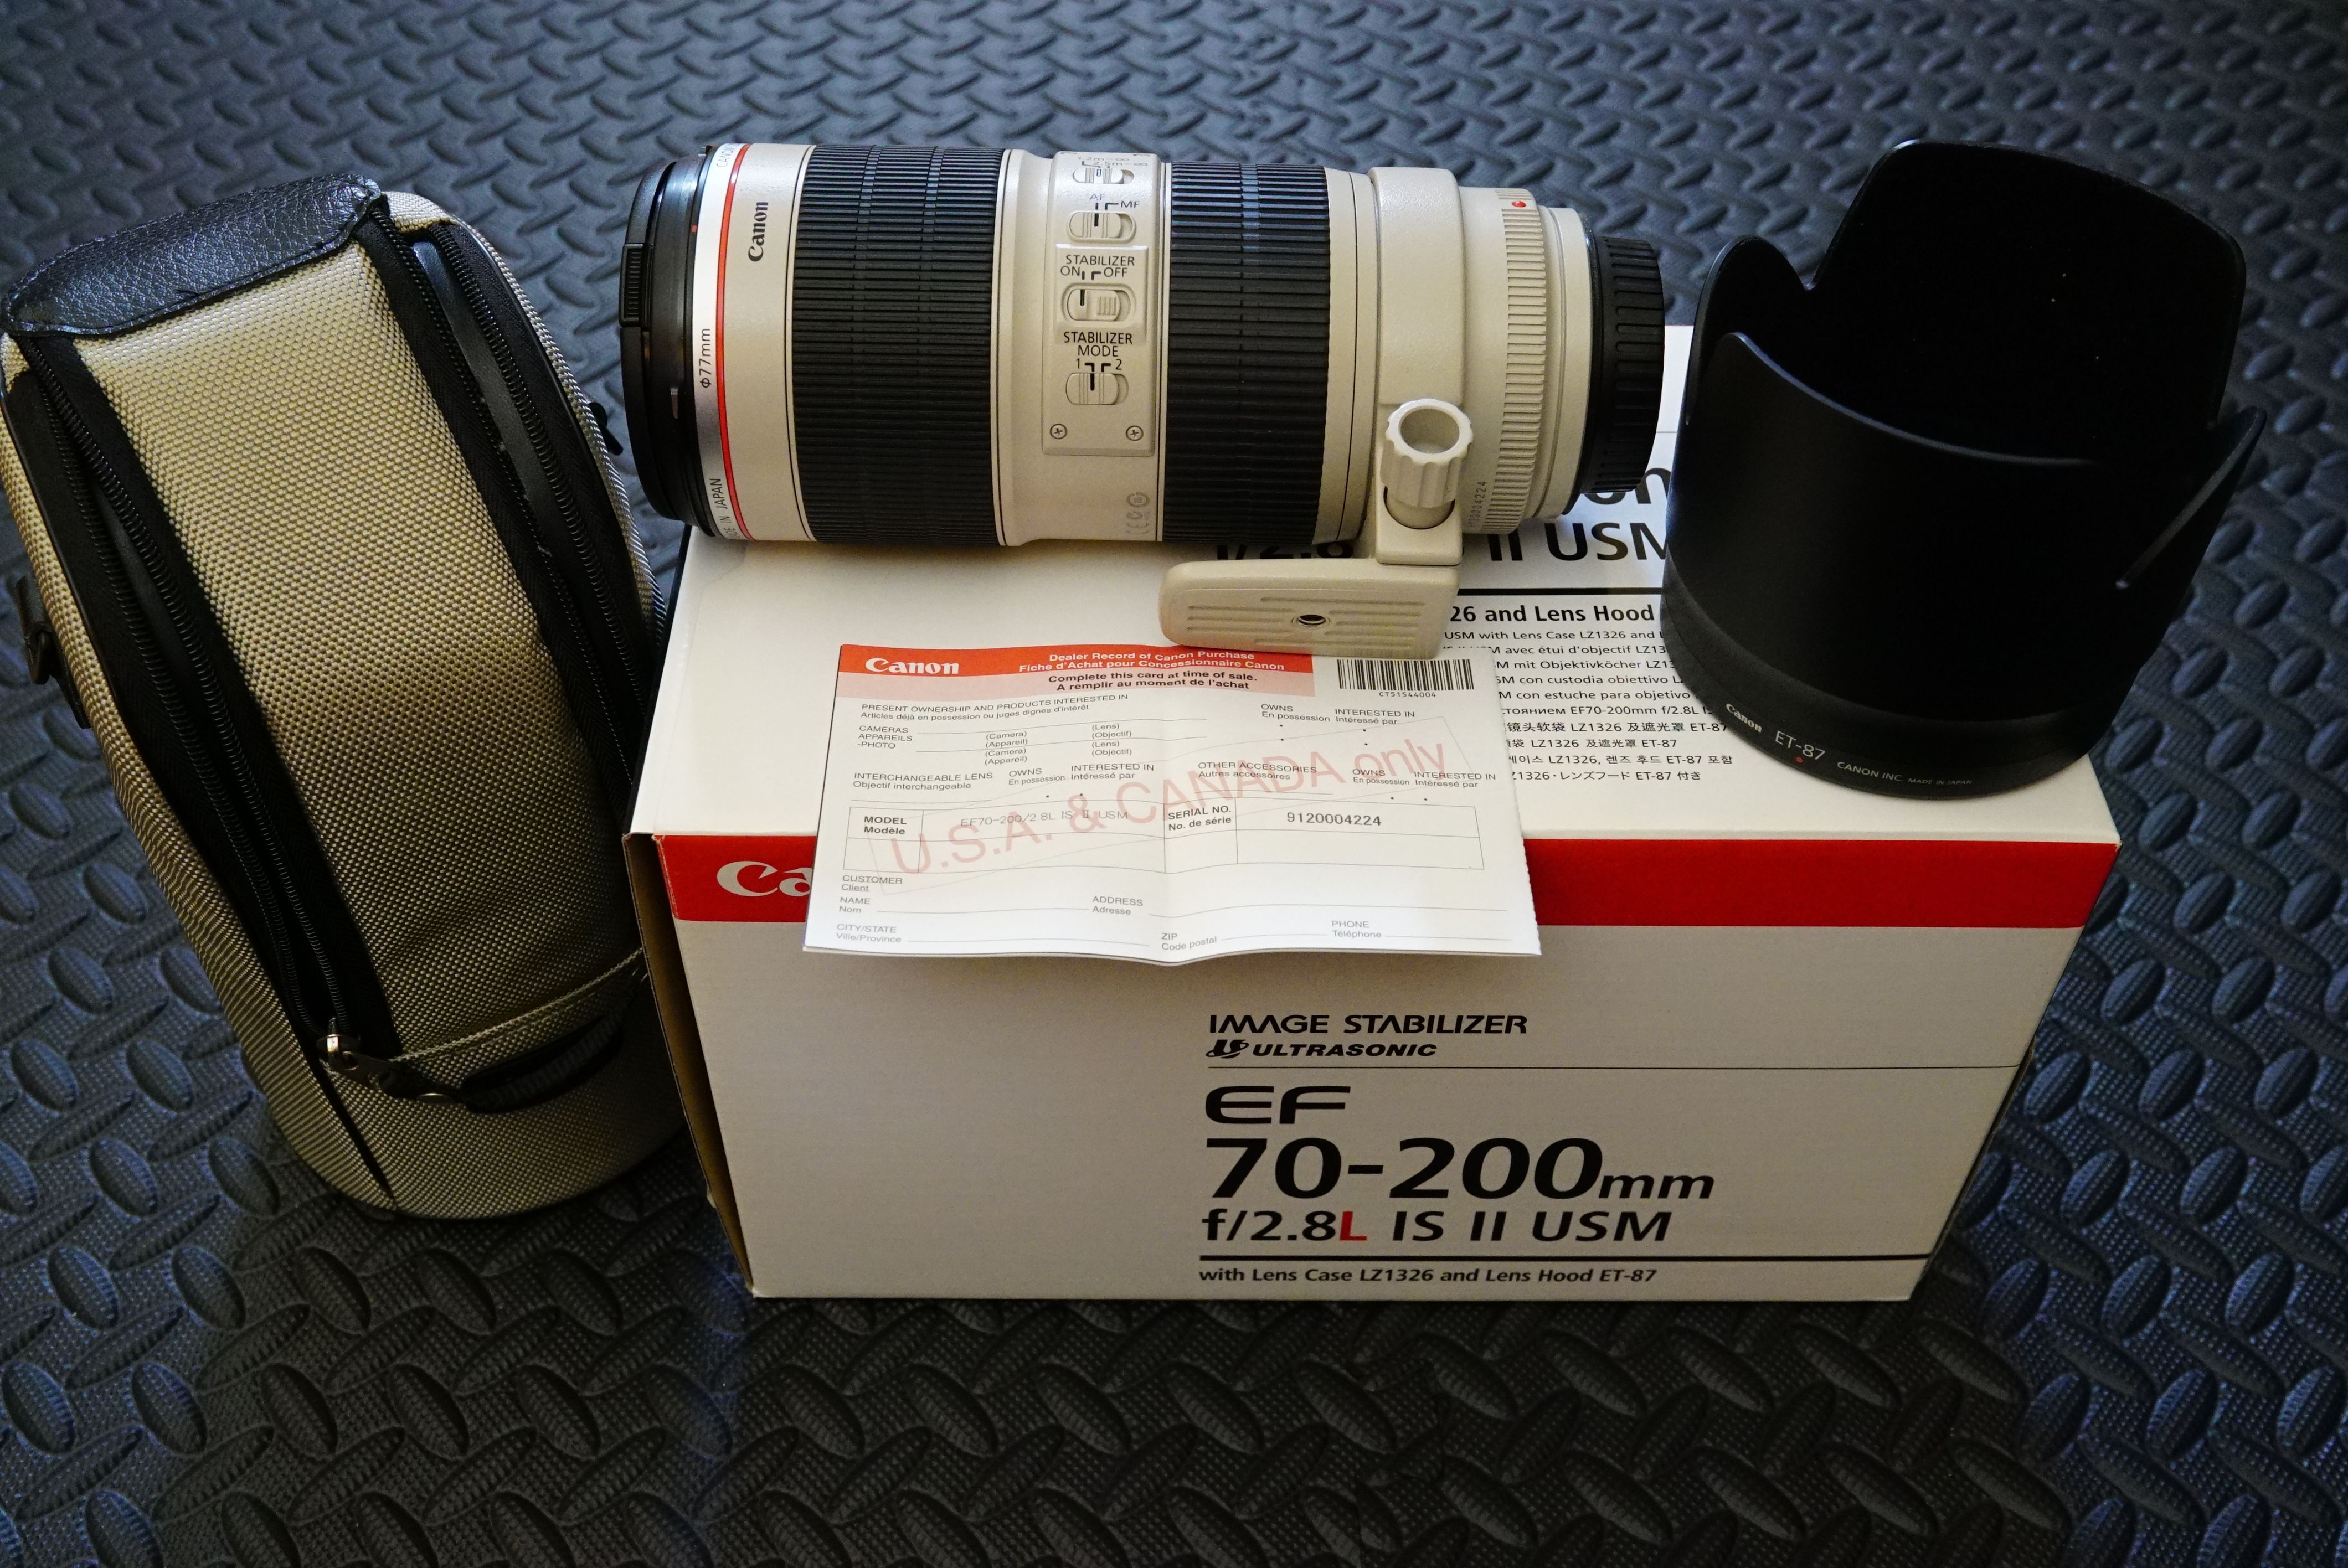 Canon 70-200mm f/2.8L IS II USM lens